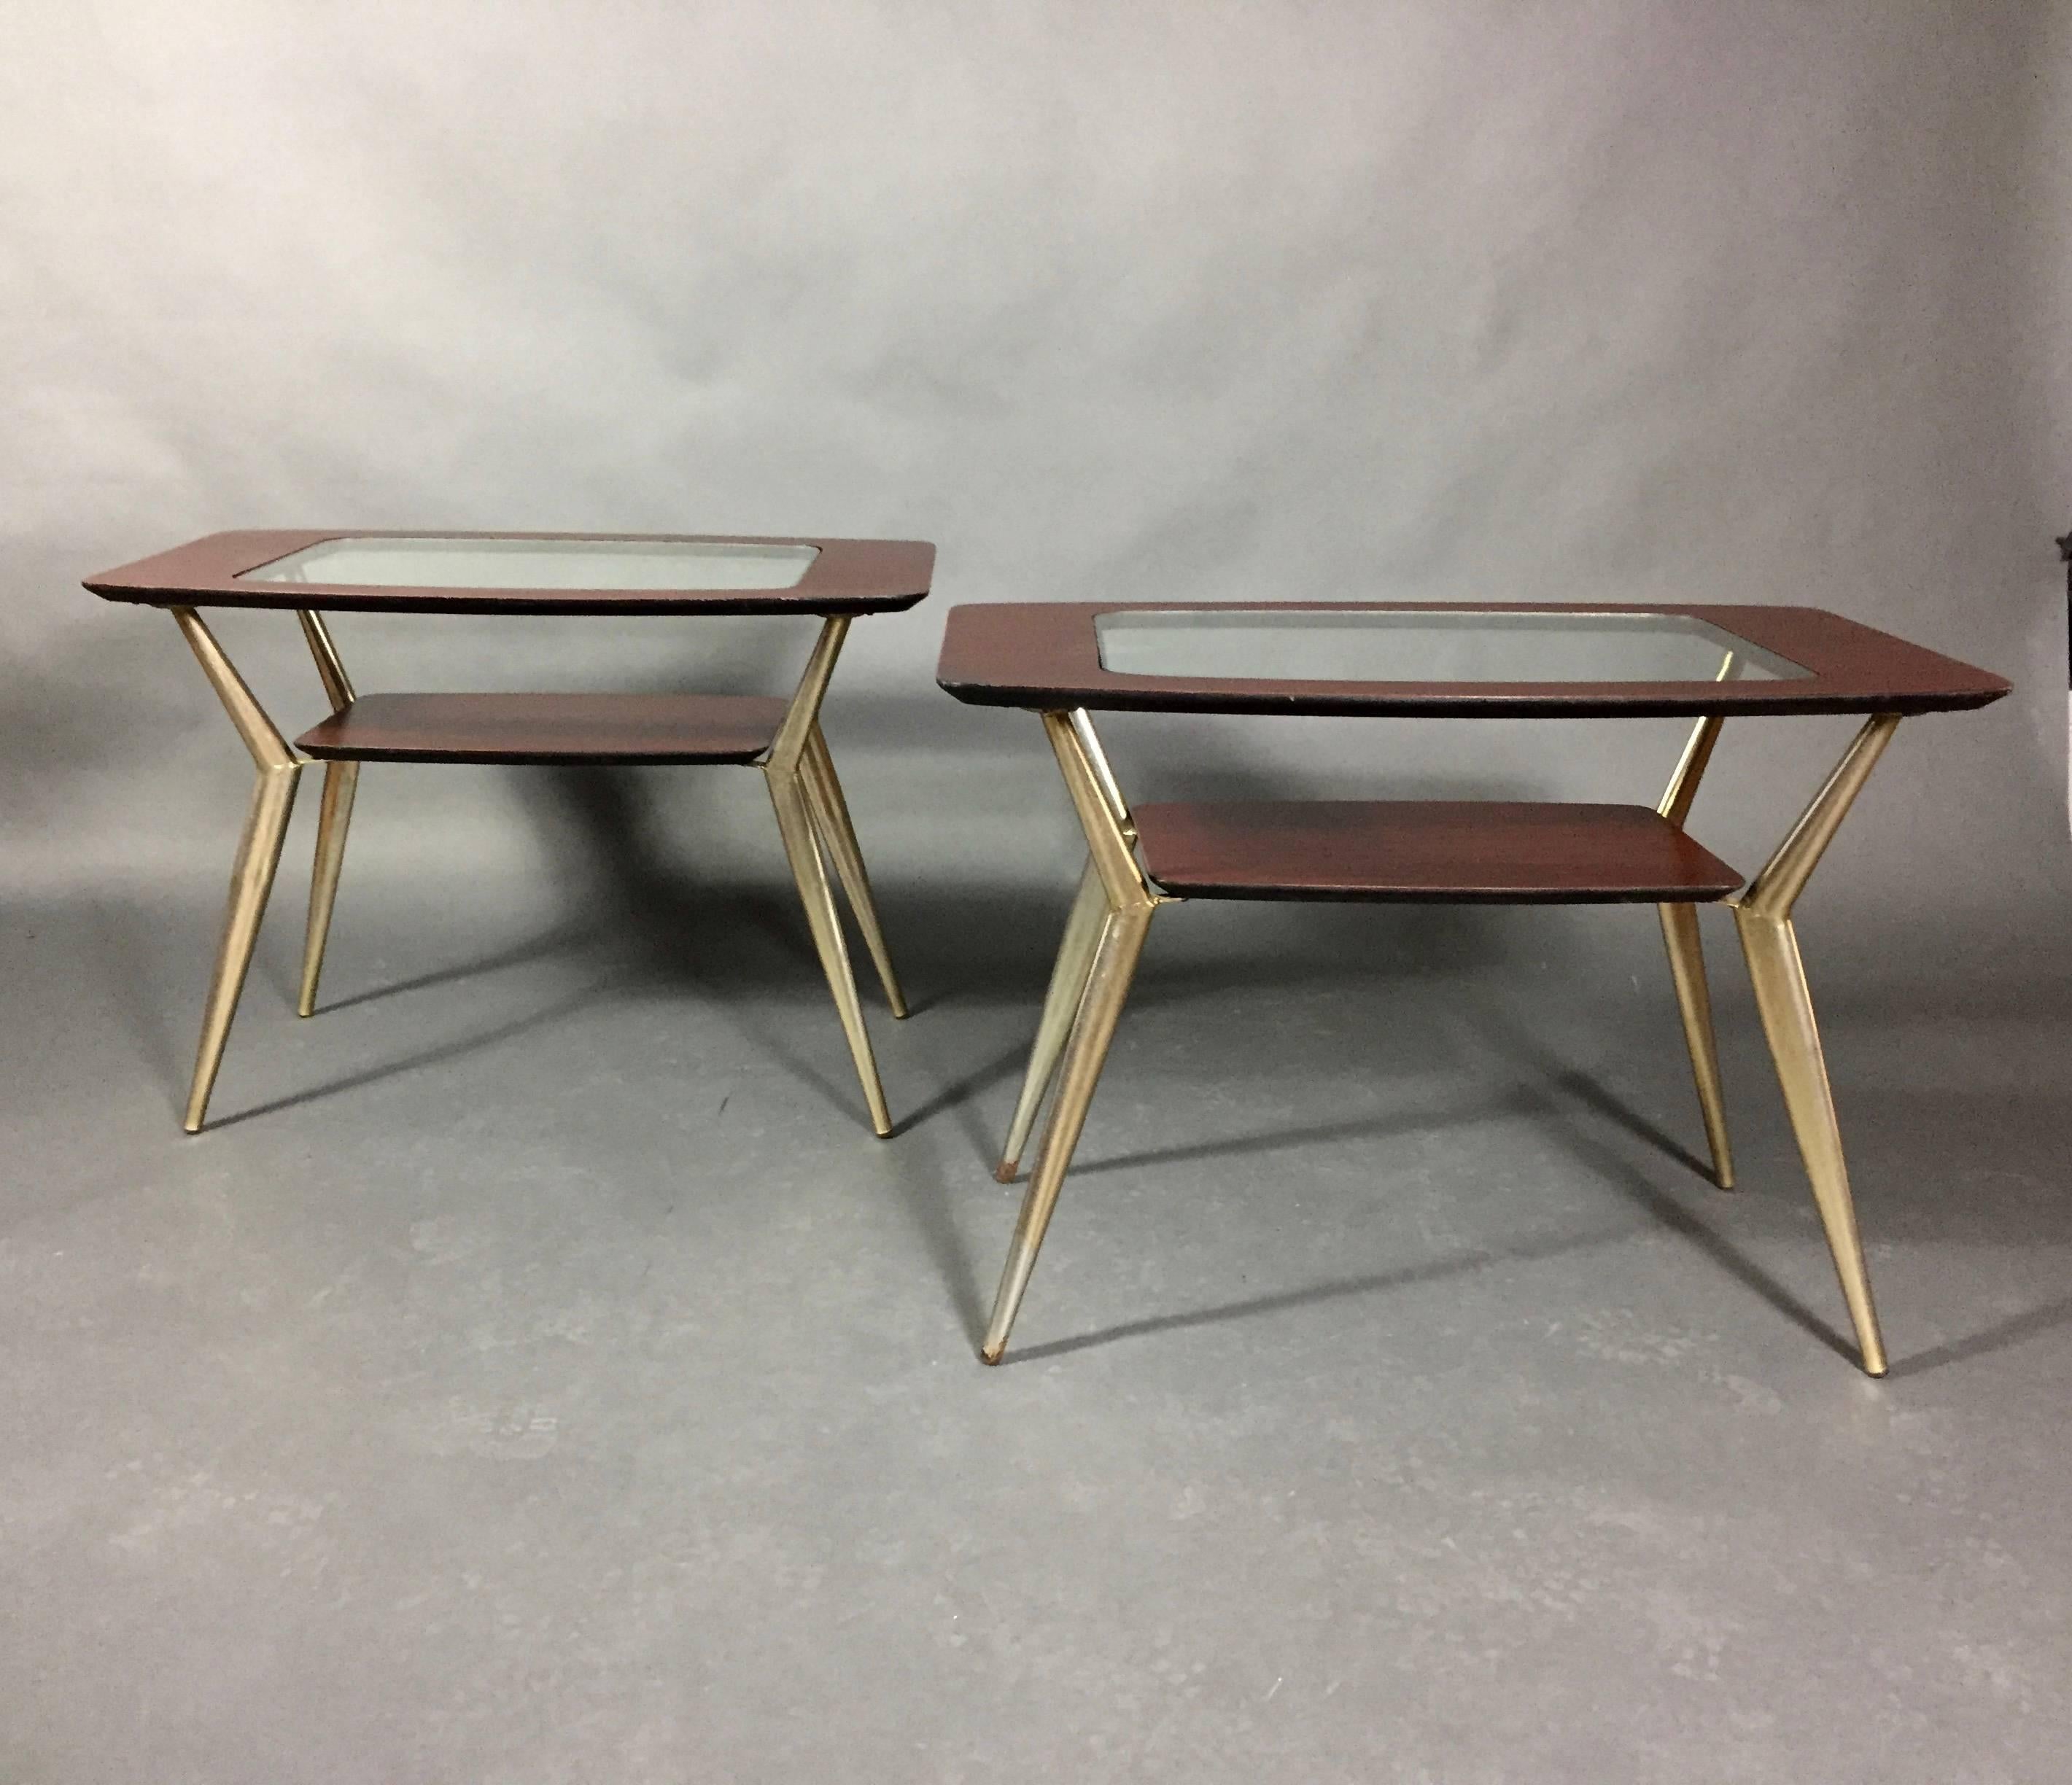 Perfect shape on this pair of Atomic metal and veneered end tables with insert glass top. The non-wood veneer has been refinished - some discoloration to metal legs remain - though we think this just adds to the charm. Designed with a bottom shelf